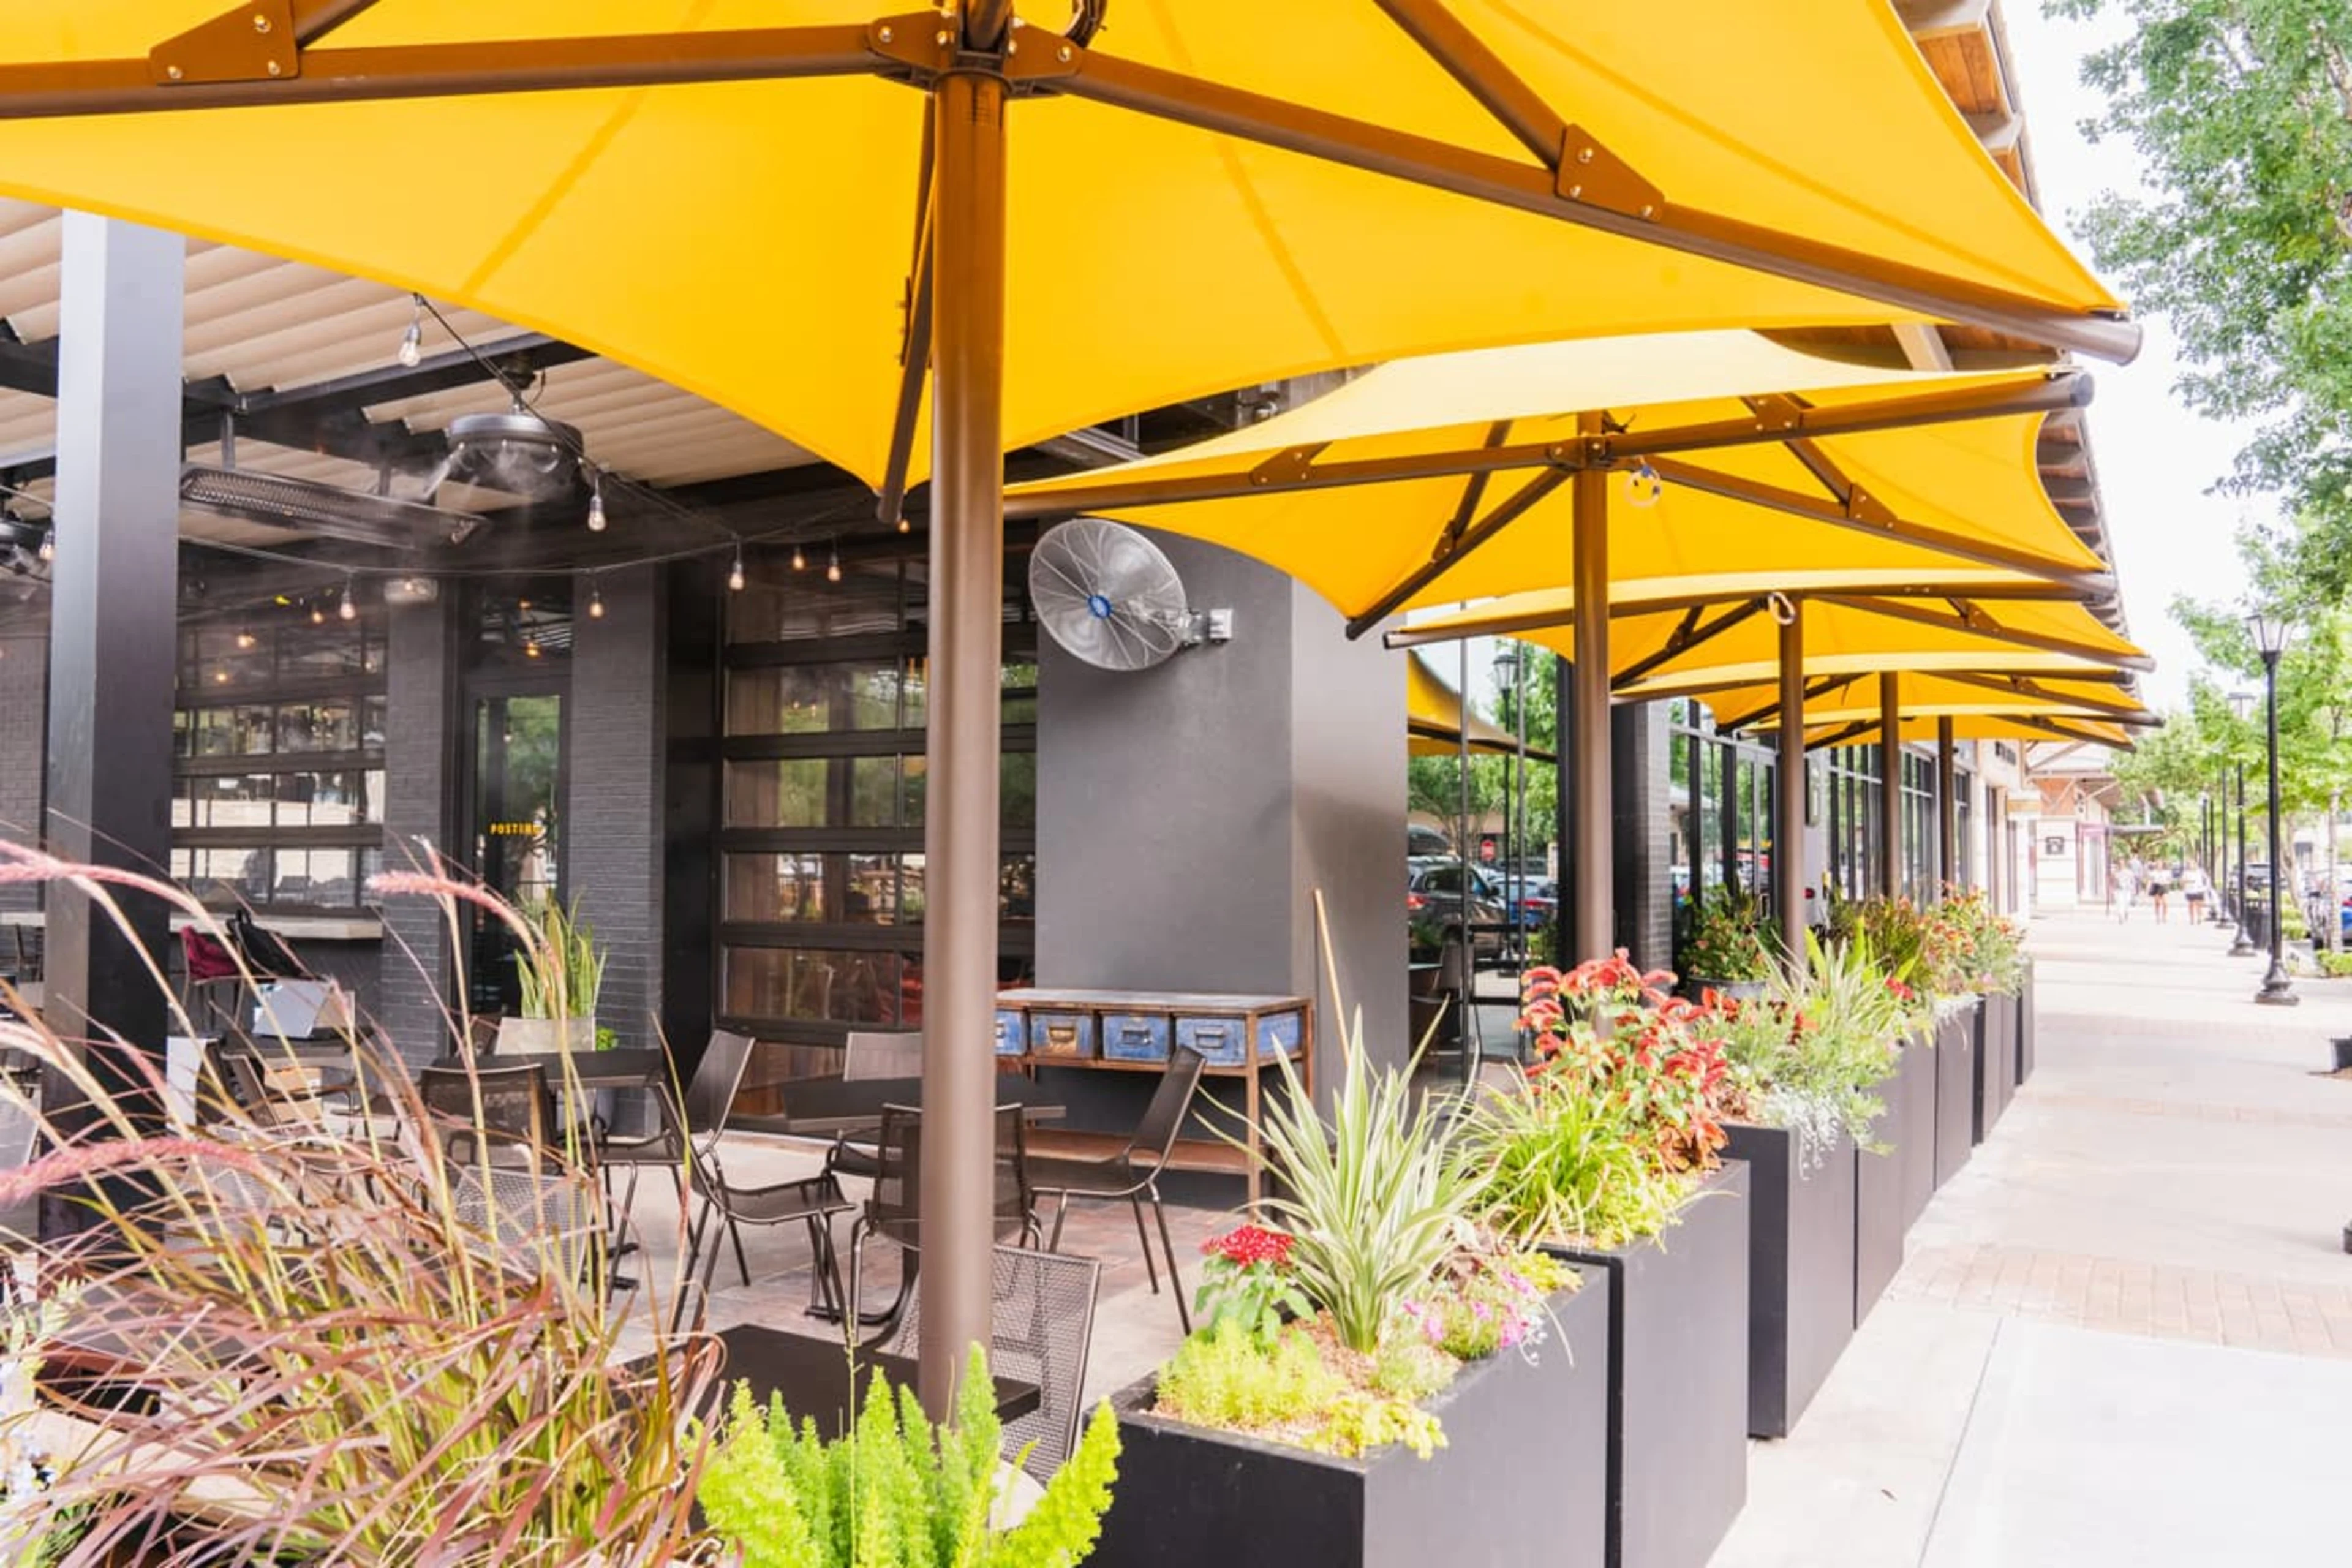 Large yellow umbrellas covering a patio with flower boxes.